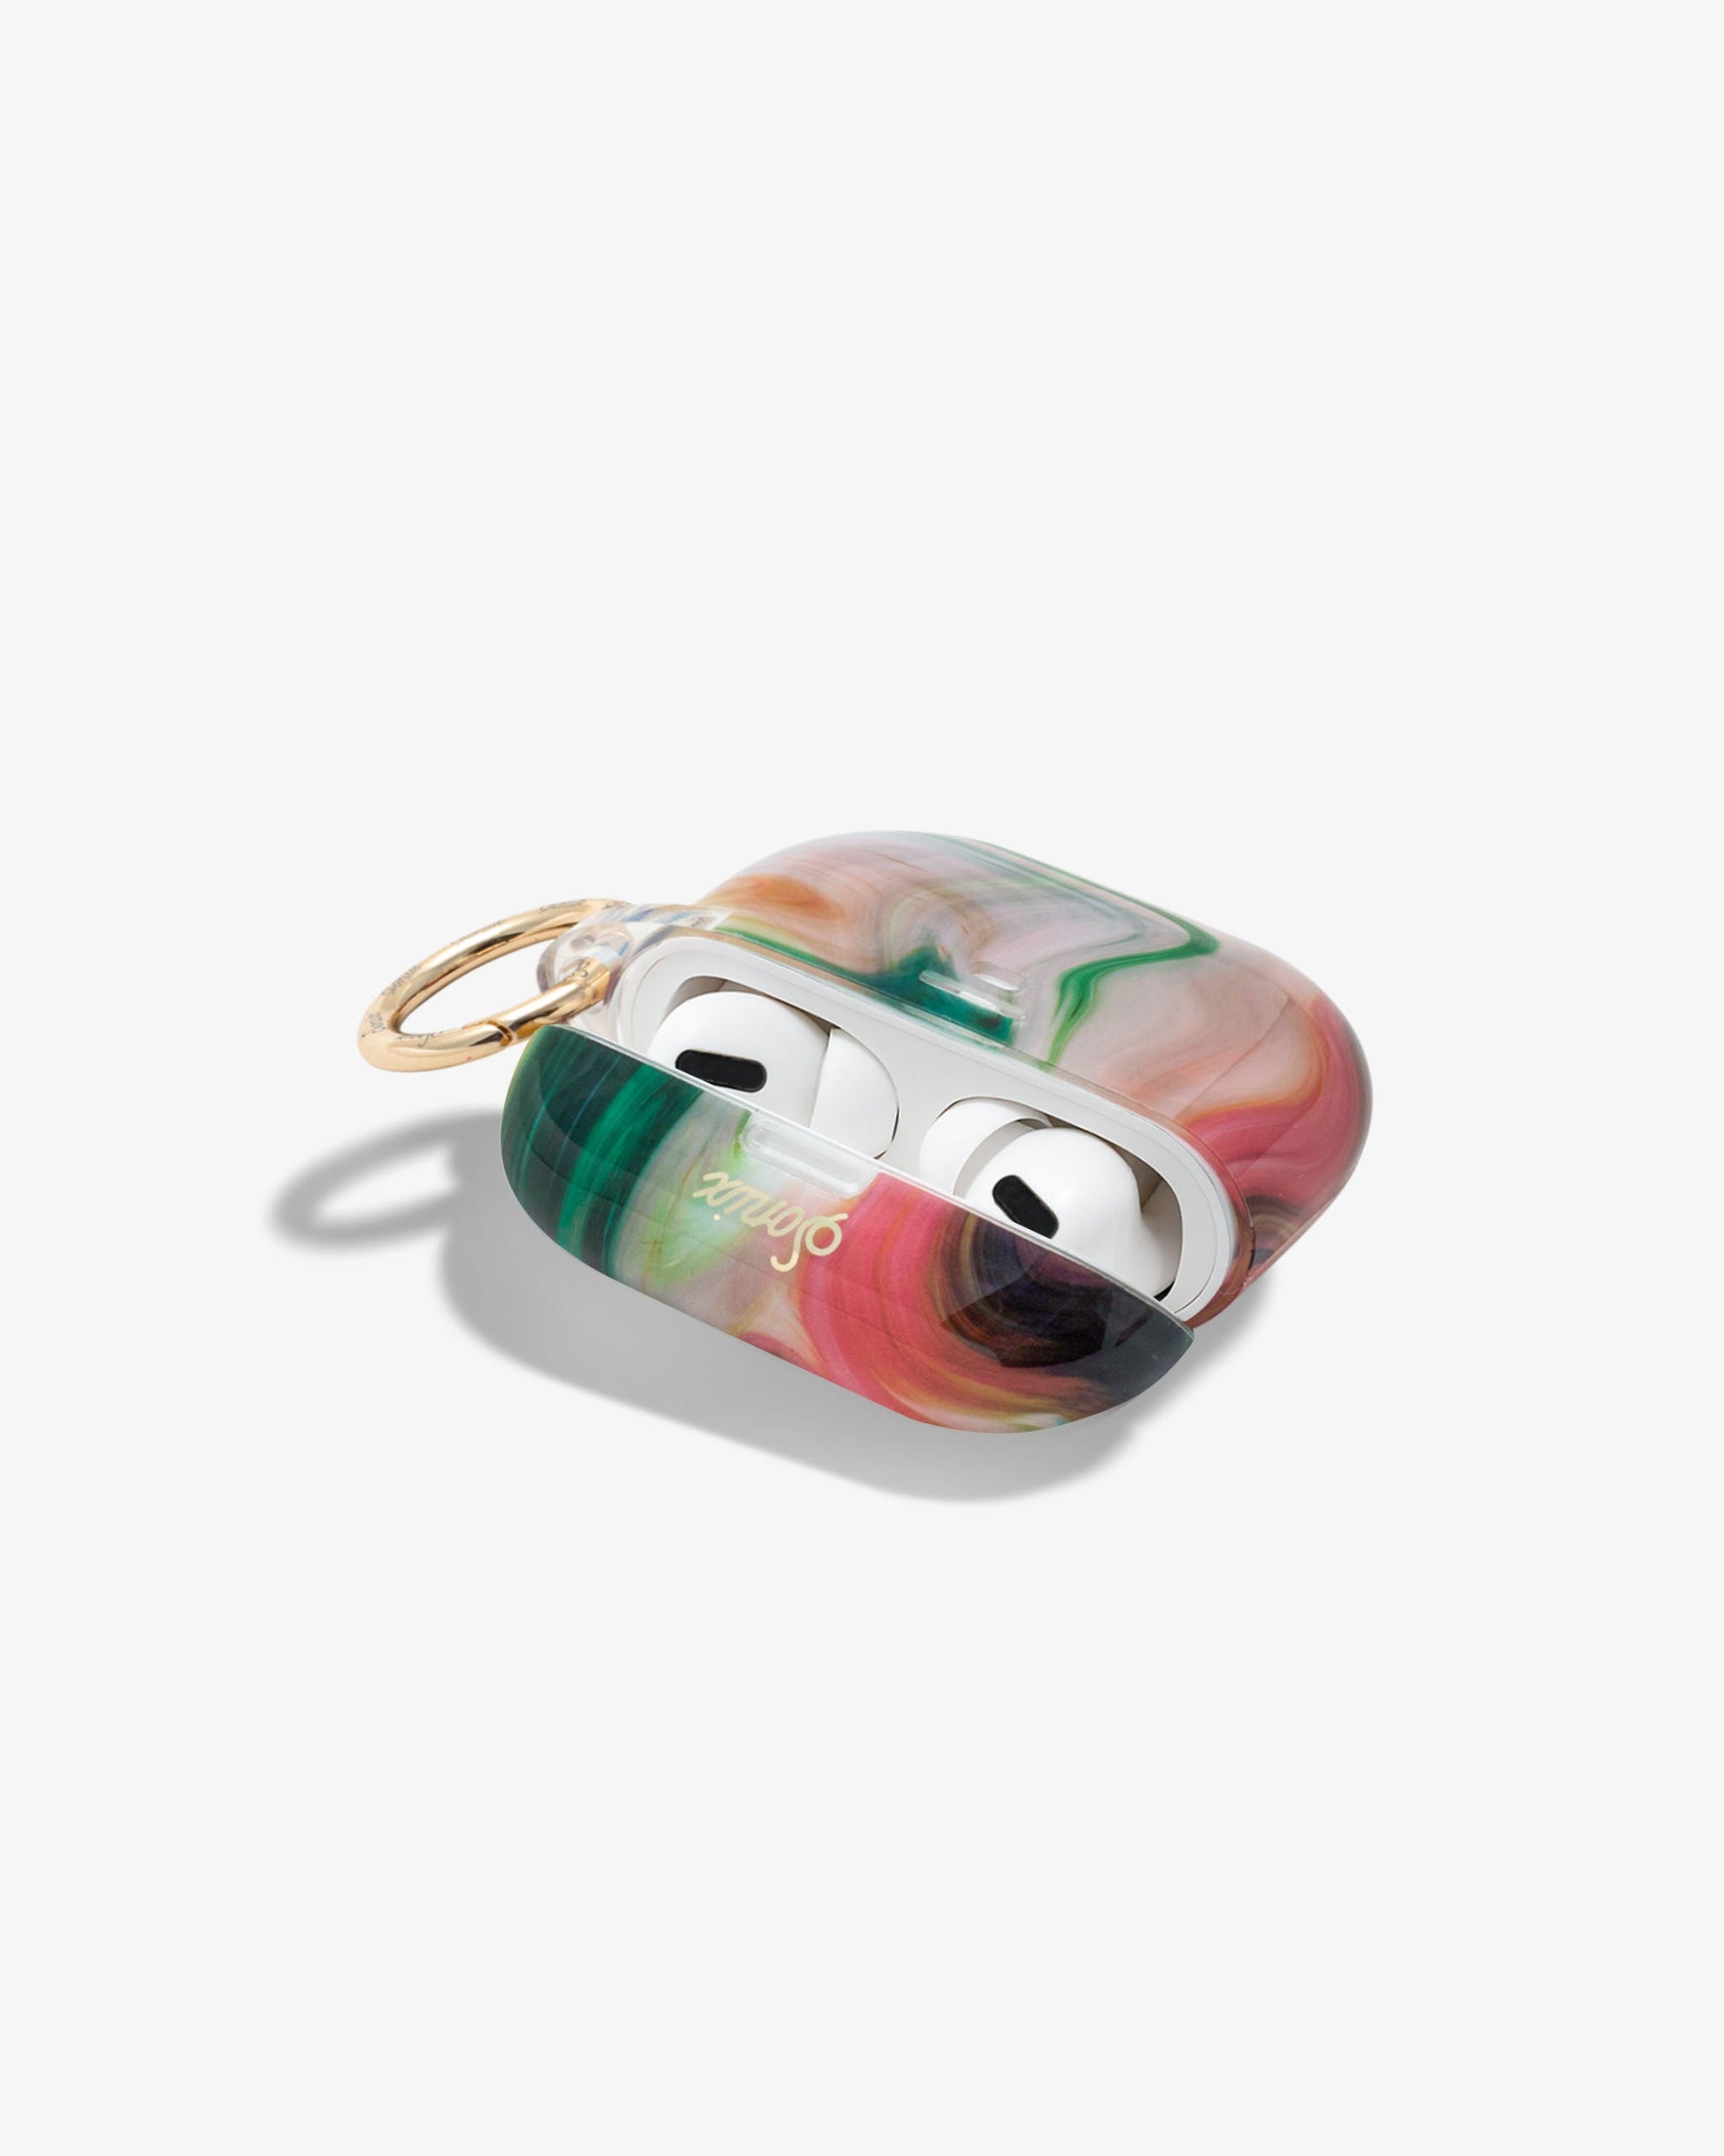 shades of red, blue, green, orange, yellow, and purple, marbled print shown on airpods pro with the case slightly open and airpods showing